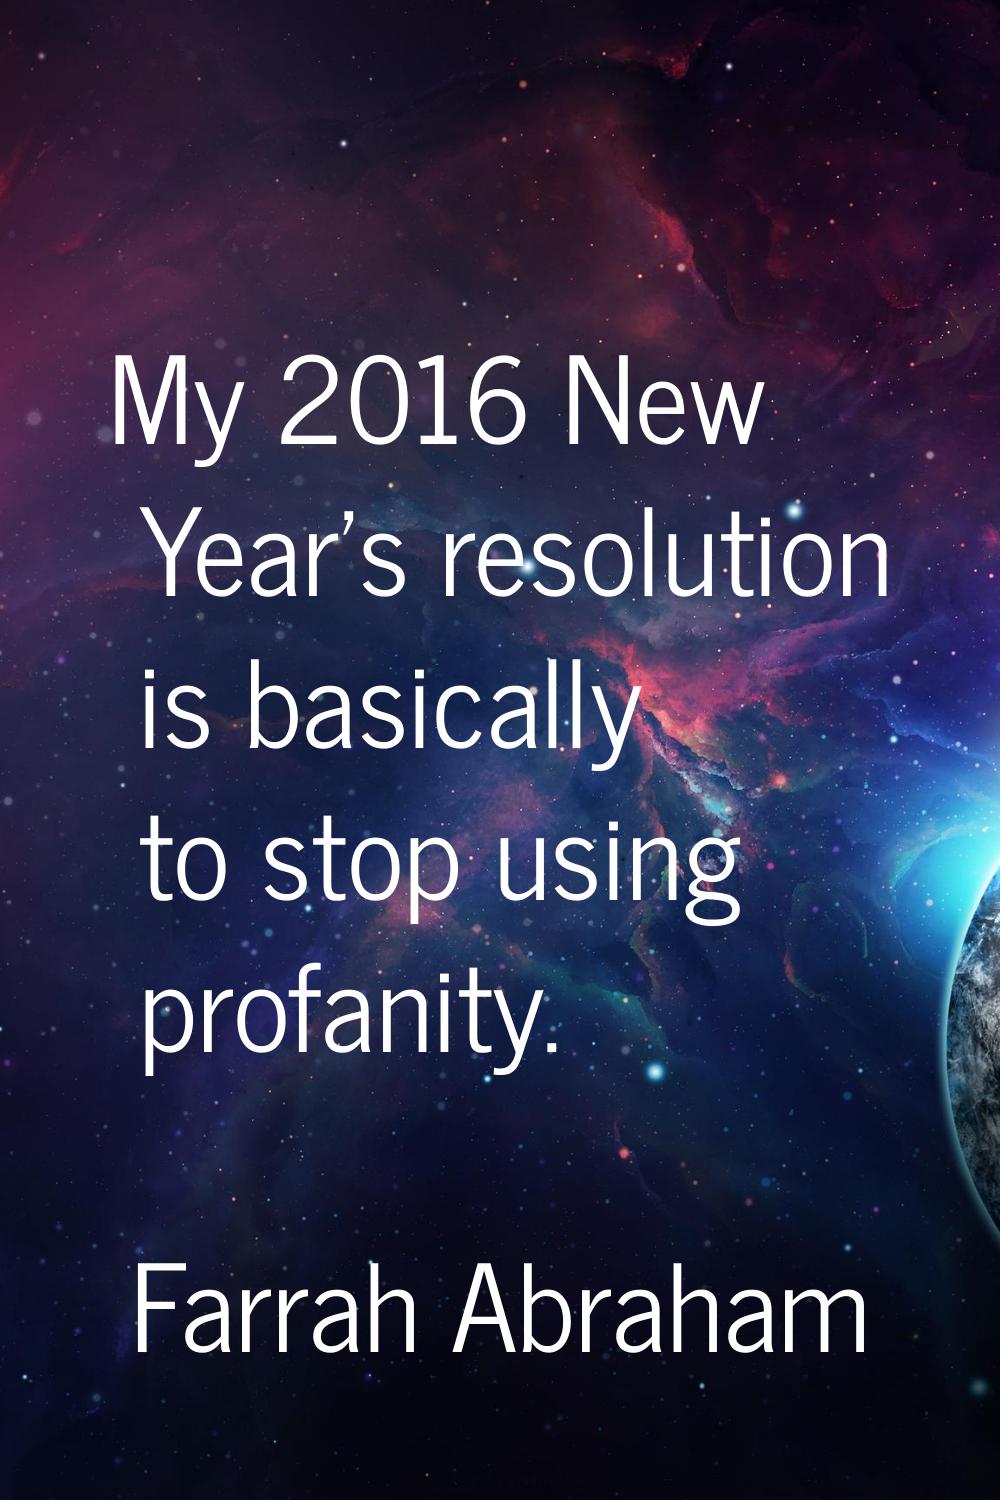 My 2016 New Year's resolution is basically to stop using profanity.